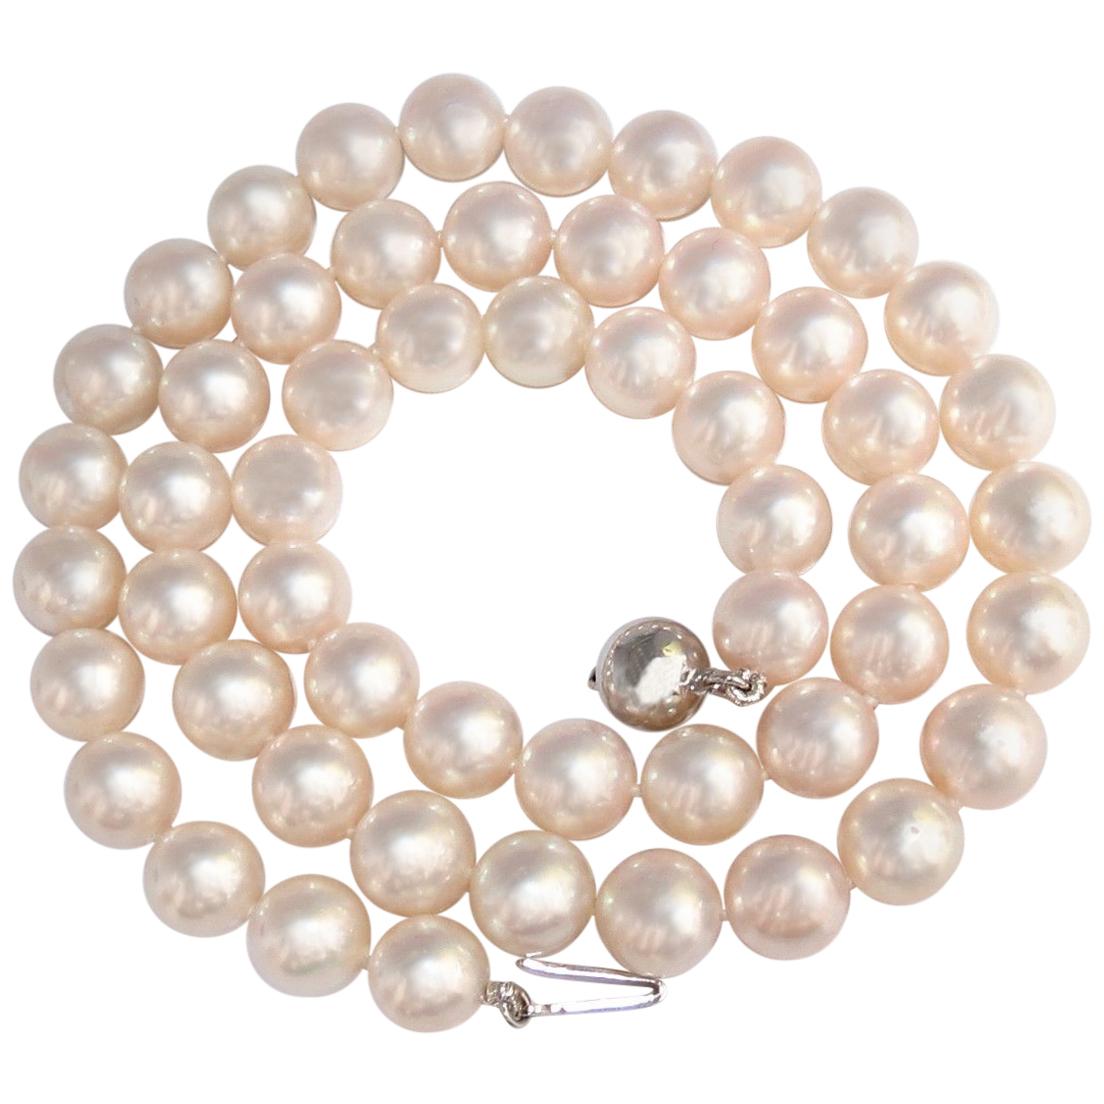 8x18mm White Akoya Cultured Pearl Pendant Necklace 